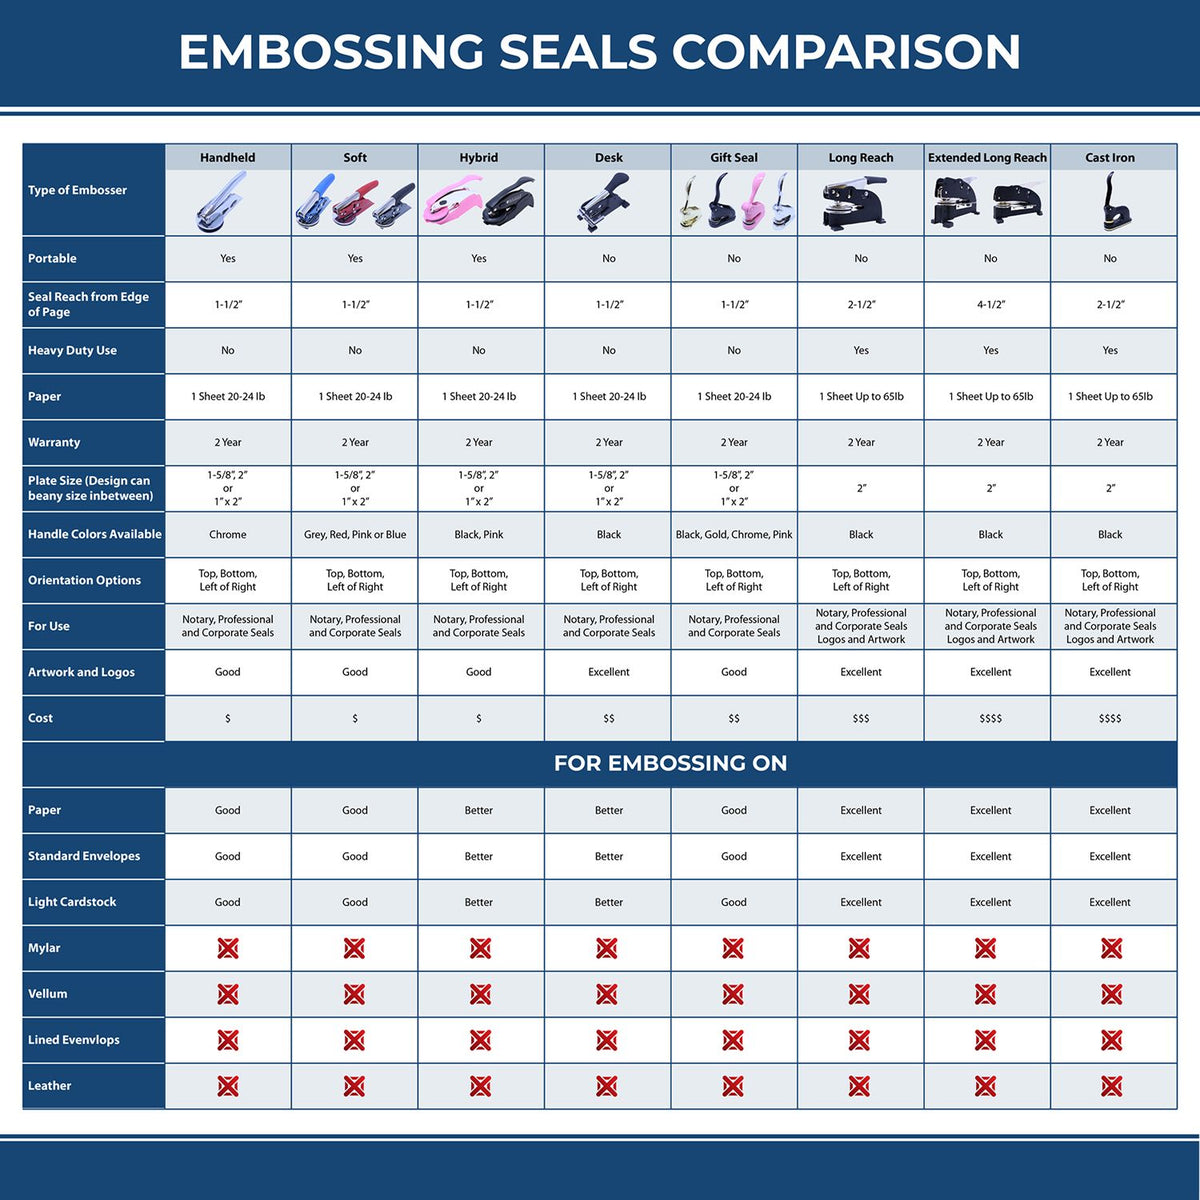 A comparison chart for the different types of mount models available for the Hybrid Wyoming Land Surveyor Seal